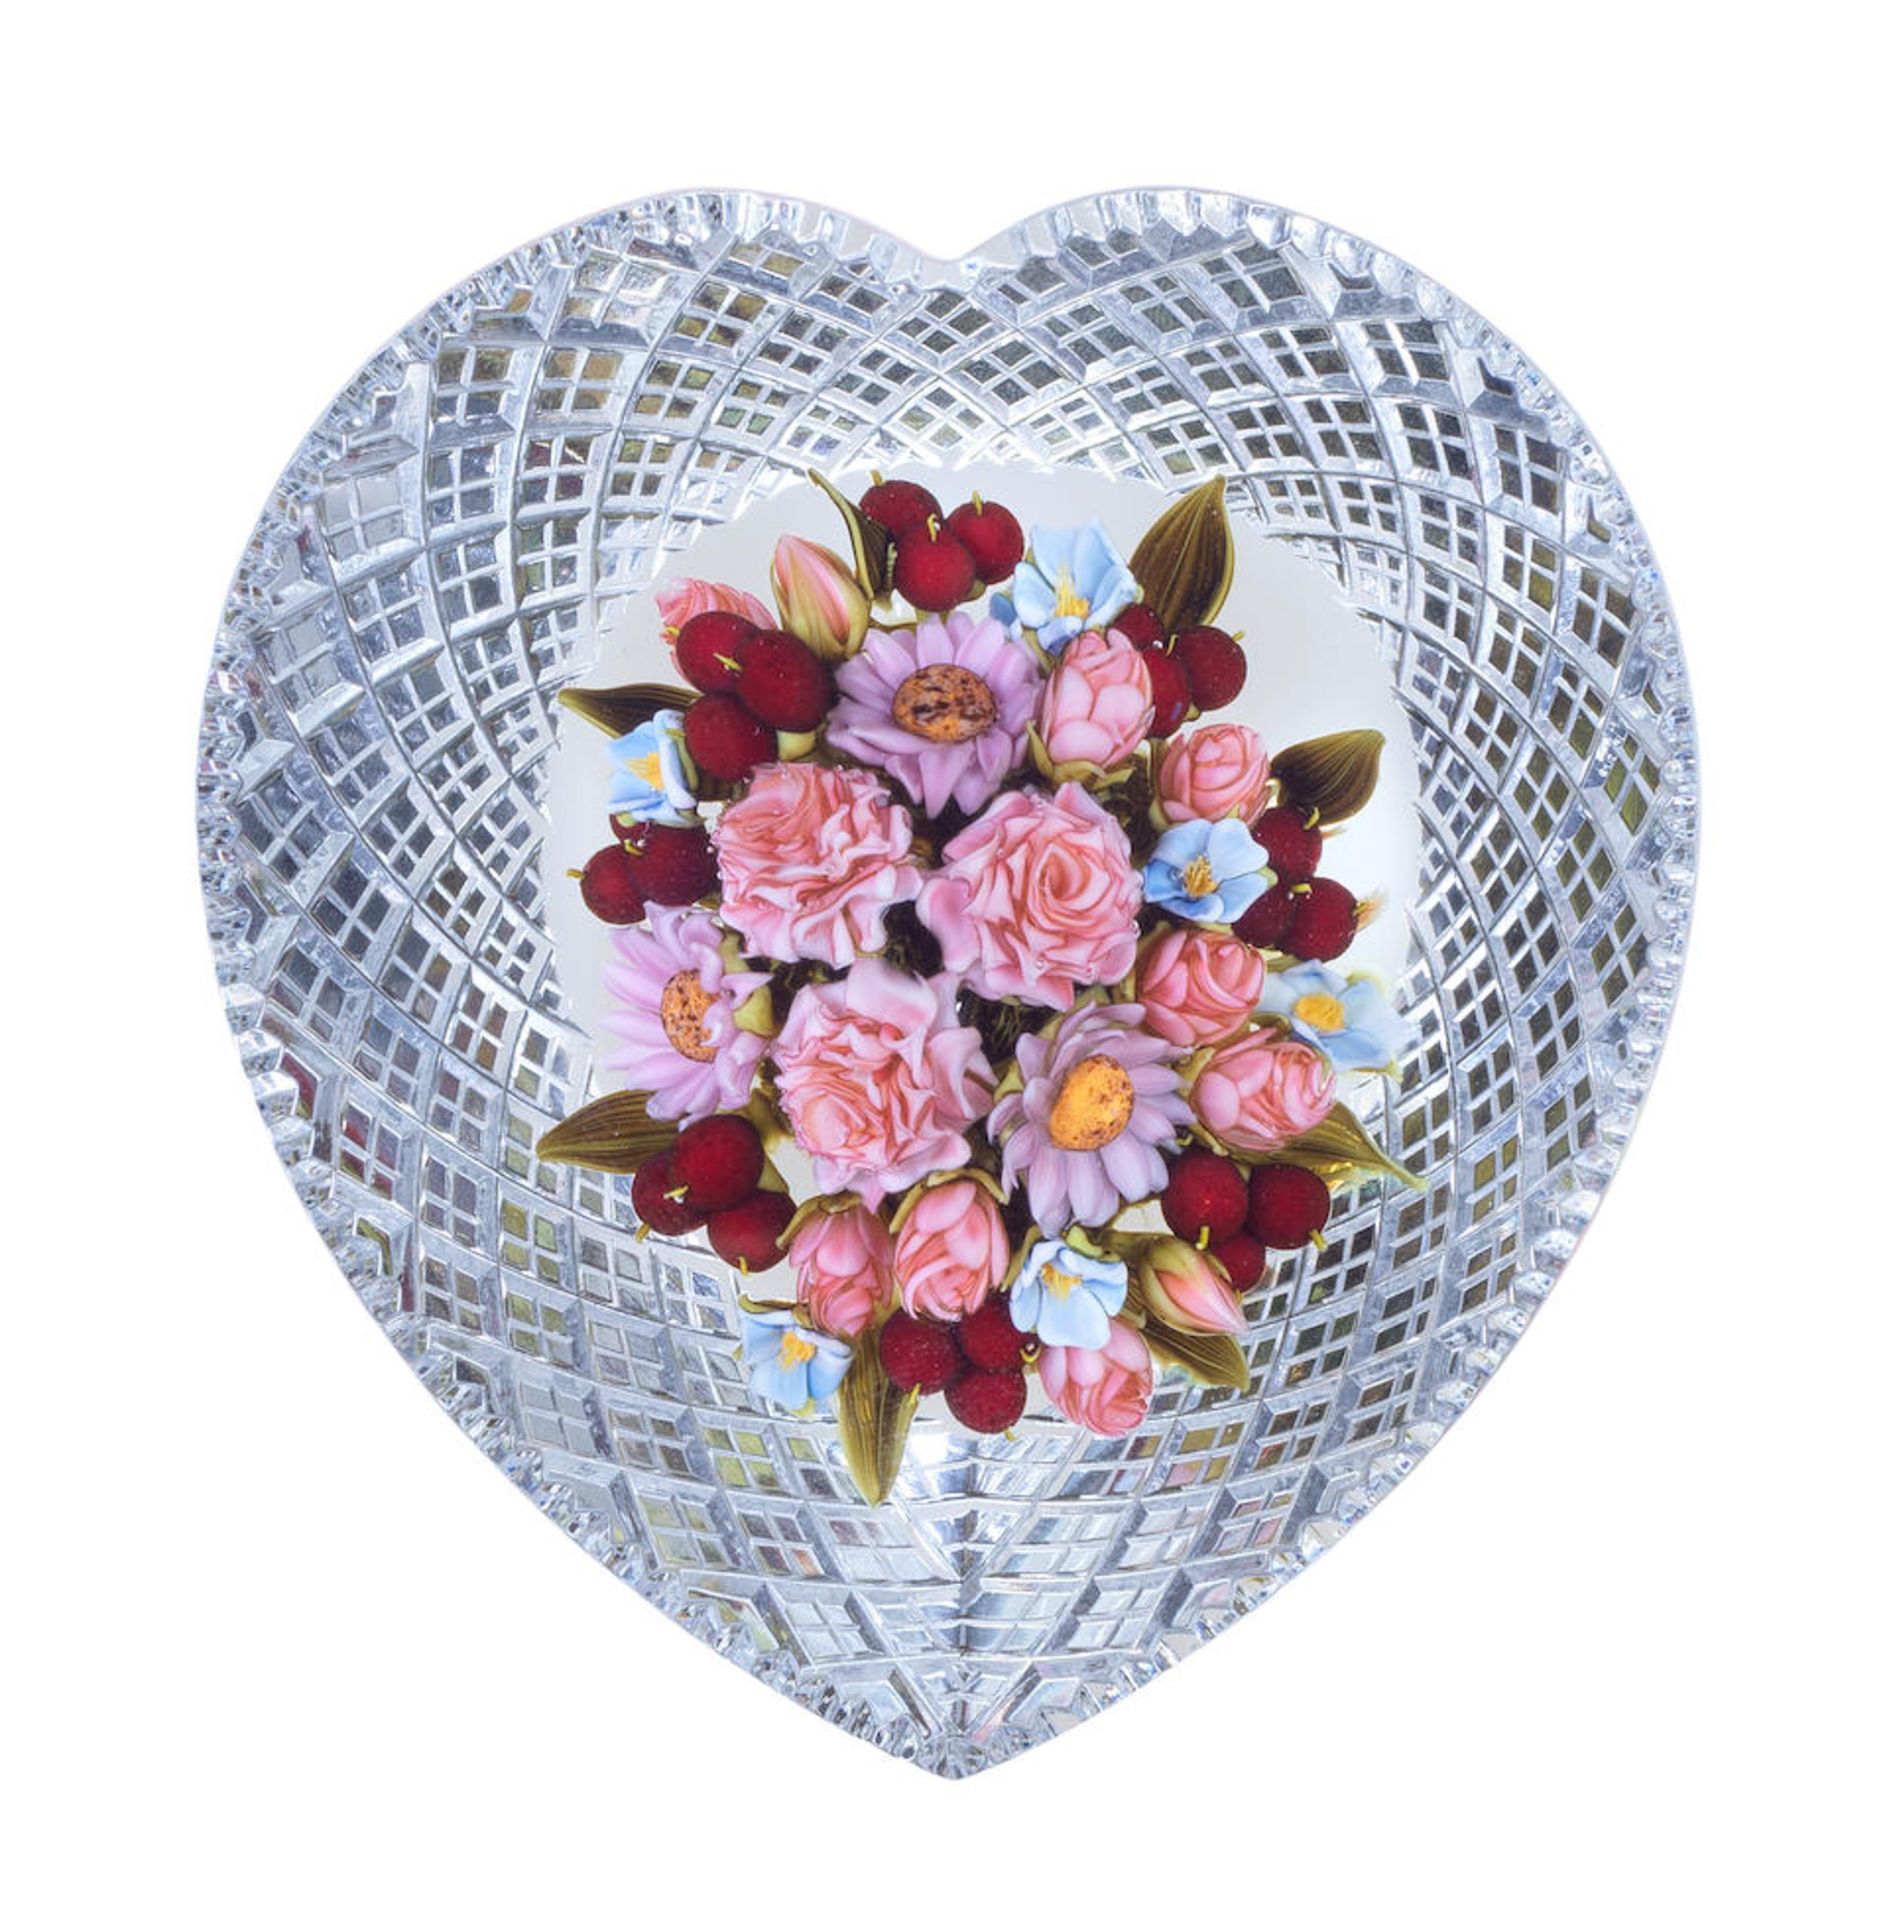 A David Graeber heart-shaped mixed bouquet paperweight from the 'Fancy Cut' series, dated 2011